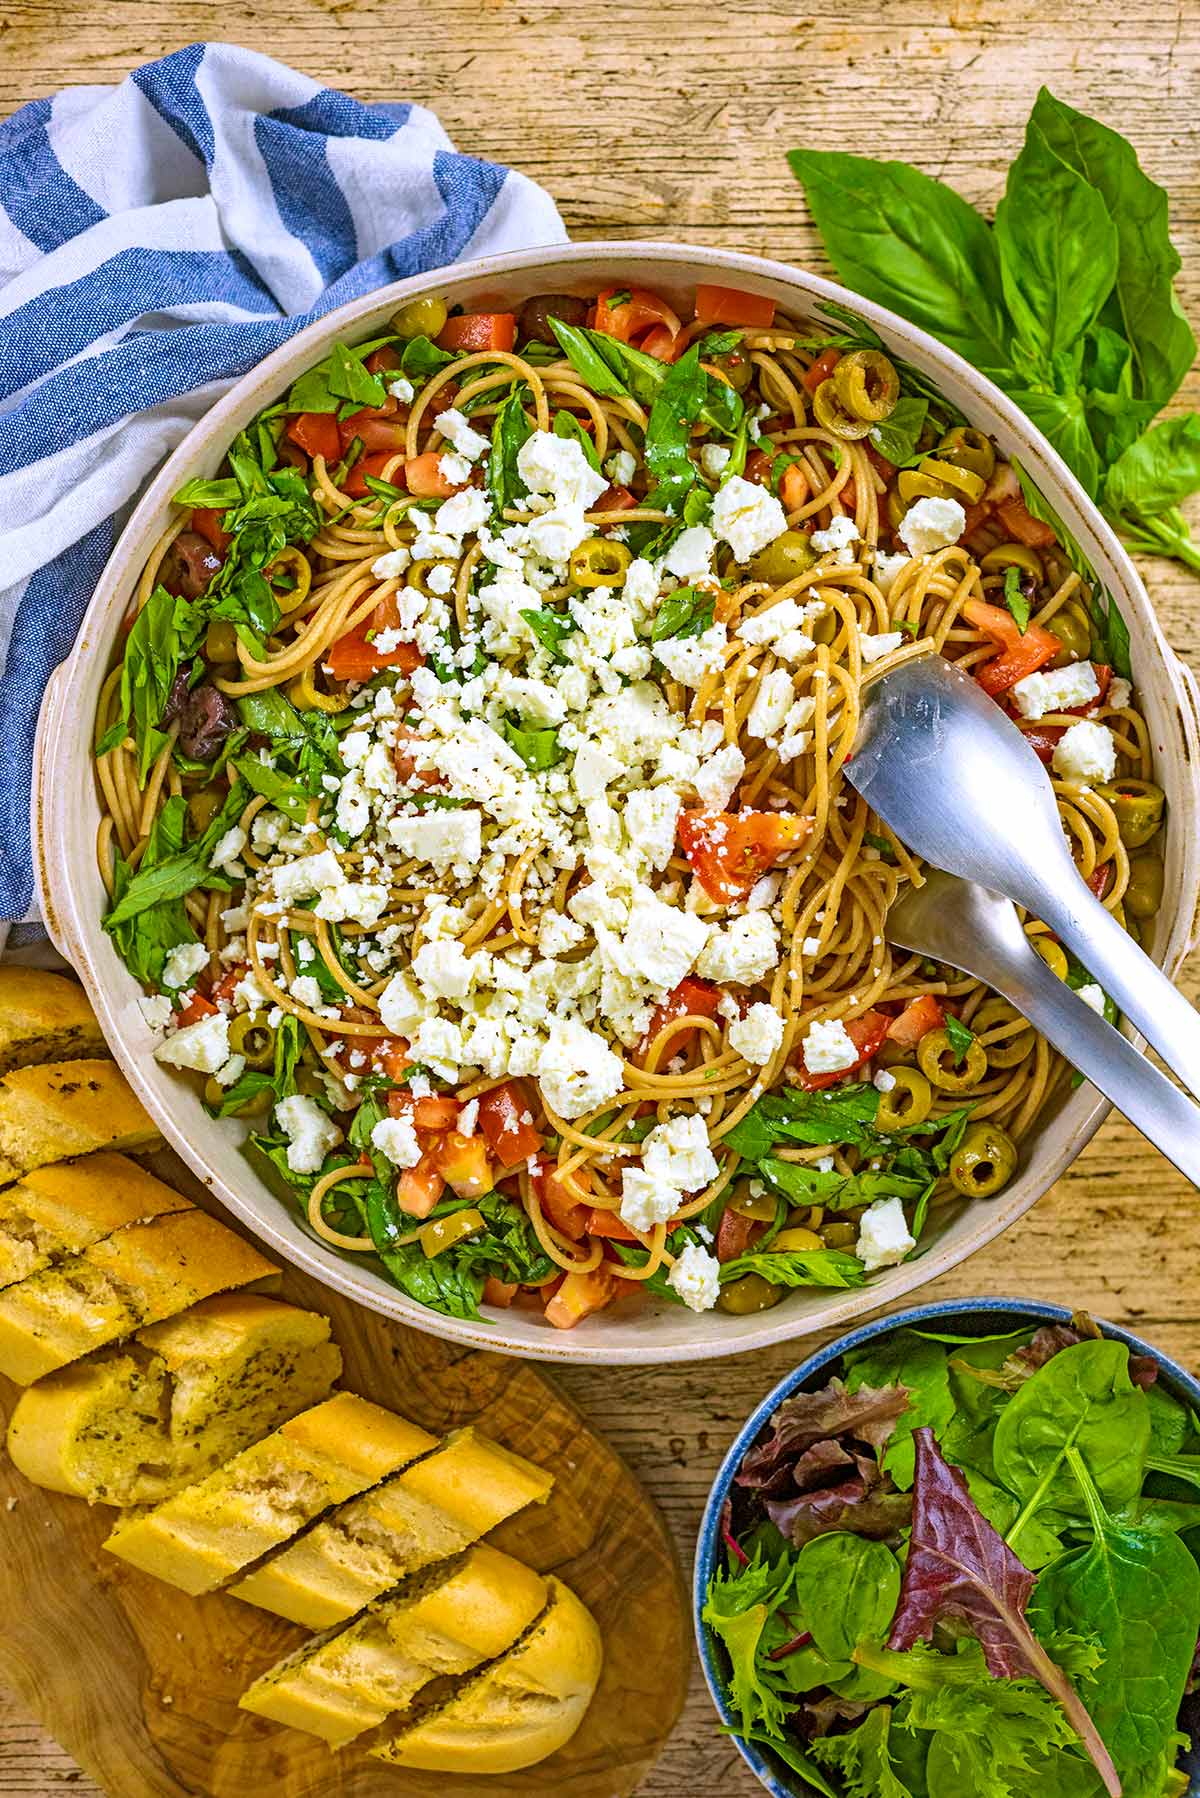 A large bowl of spaghetti and vegetables topped with crumbled feta.